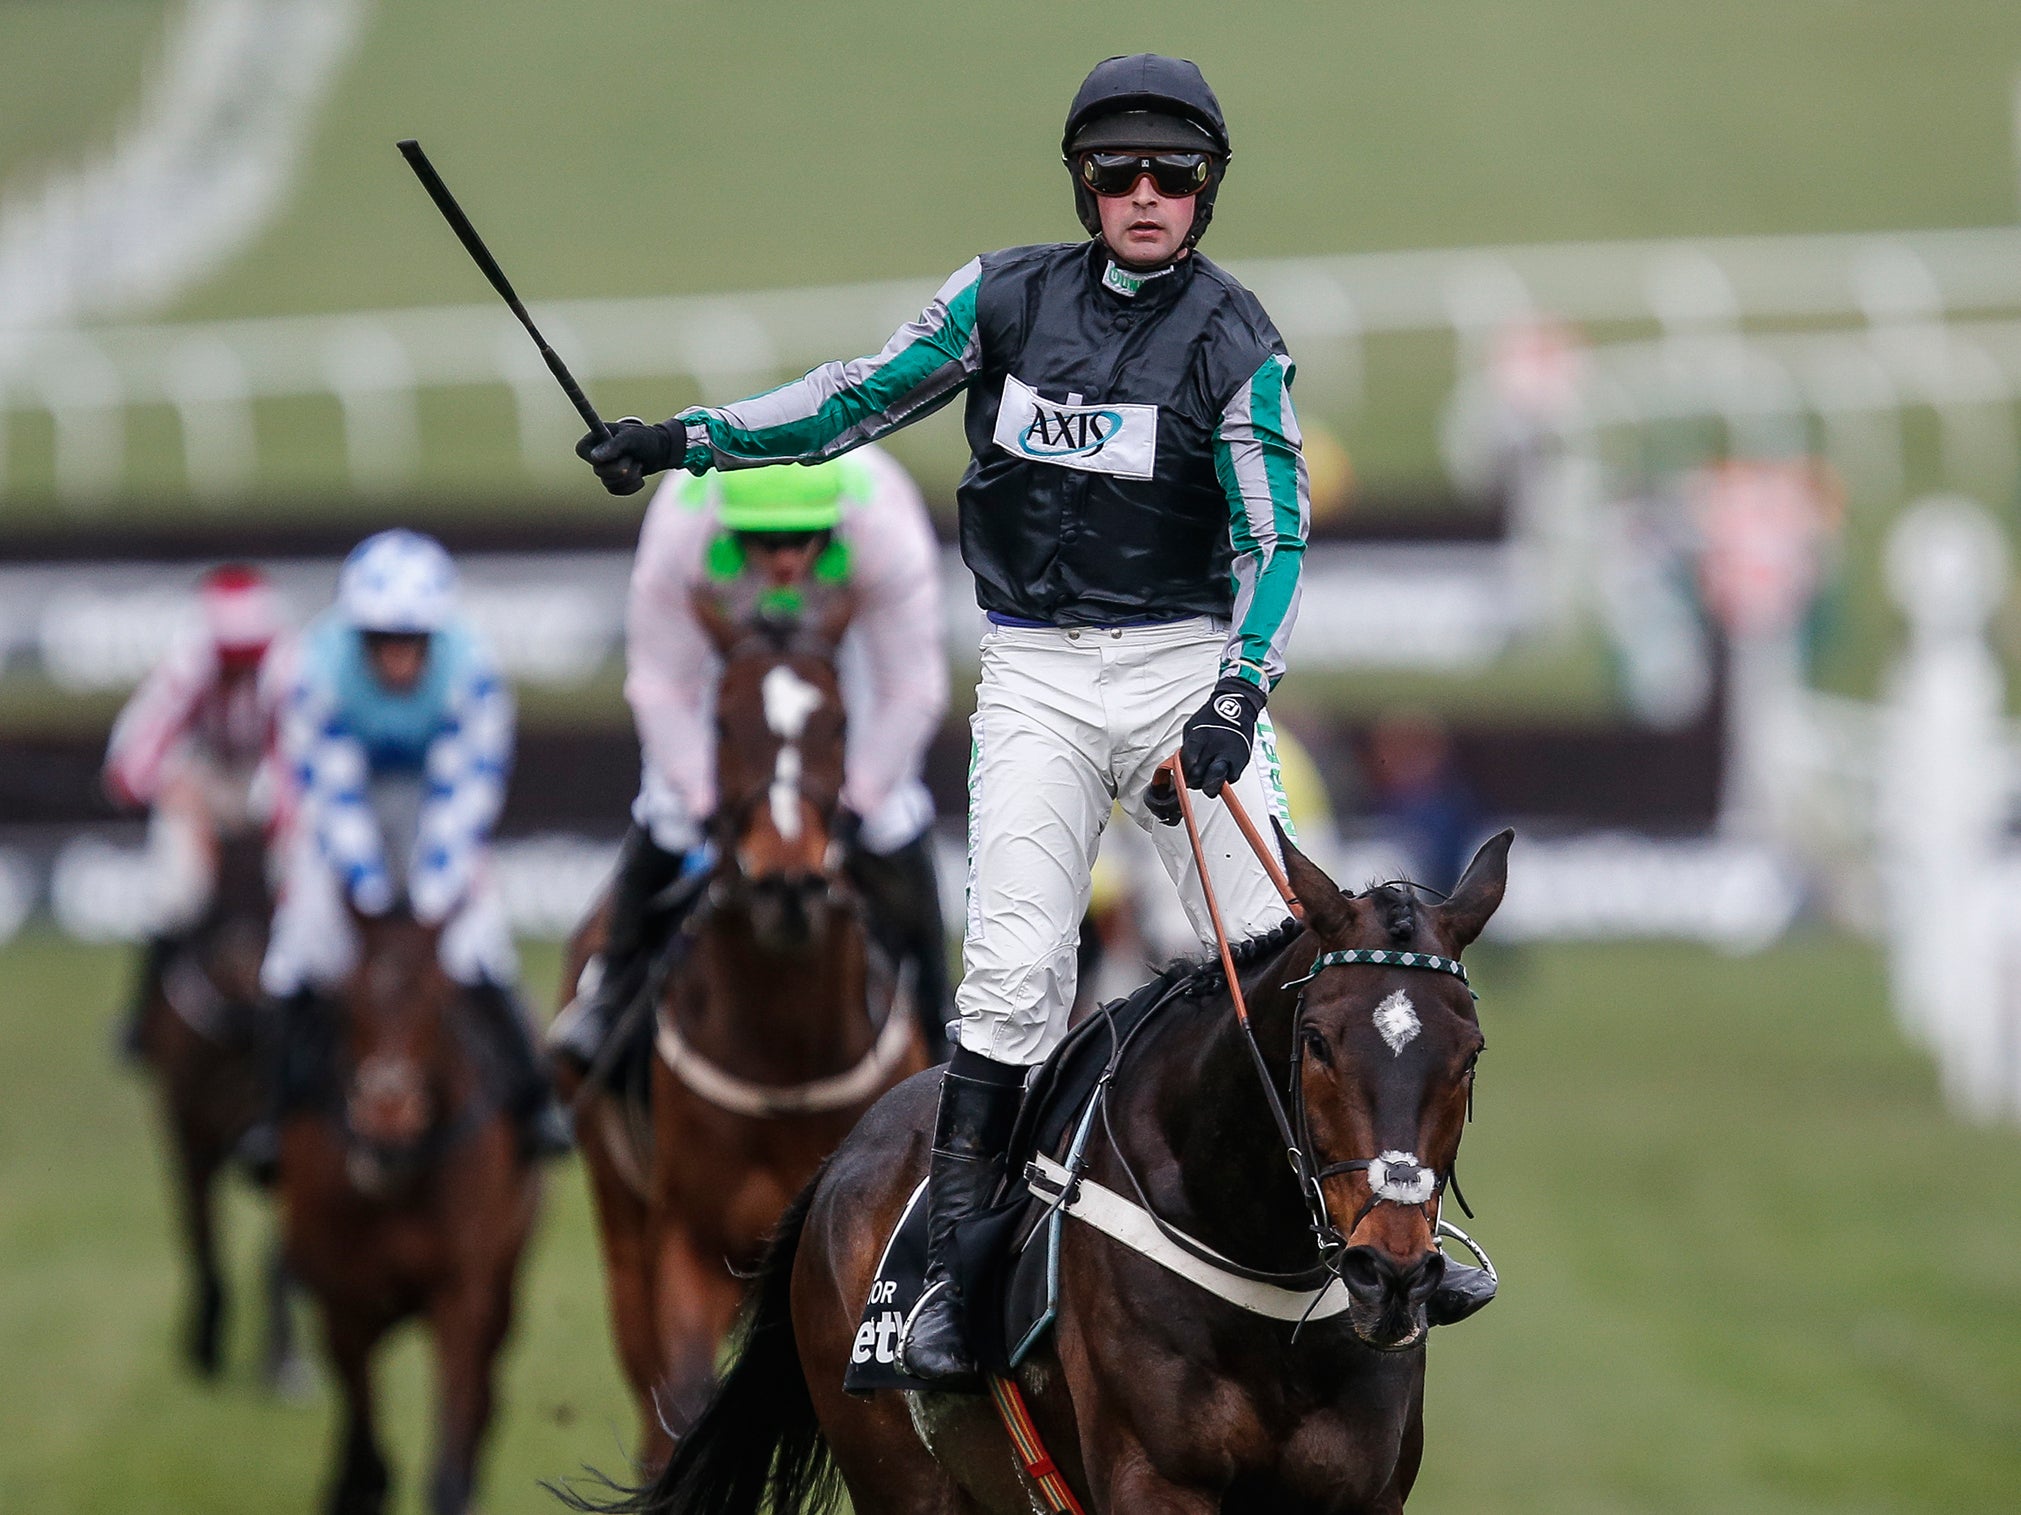 Altior and Nico de Boinville claimed the 2018 Queen Mother Champion Chase for Nicky Henderson